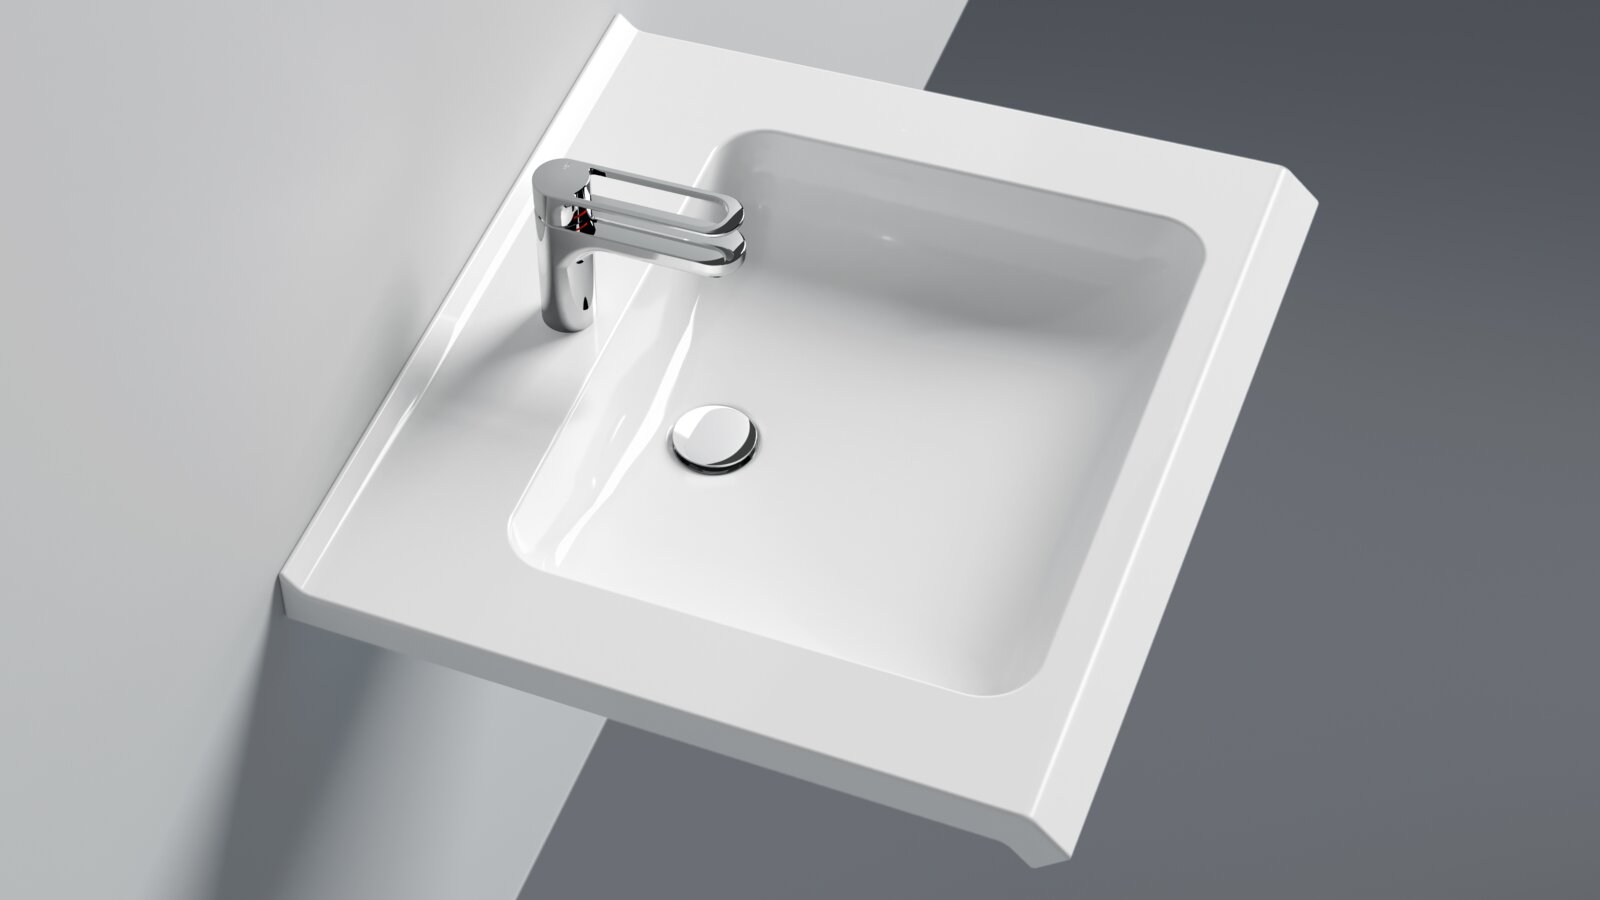 Washbasin with single lever tap in chrome